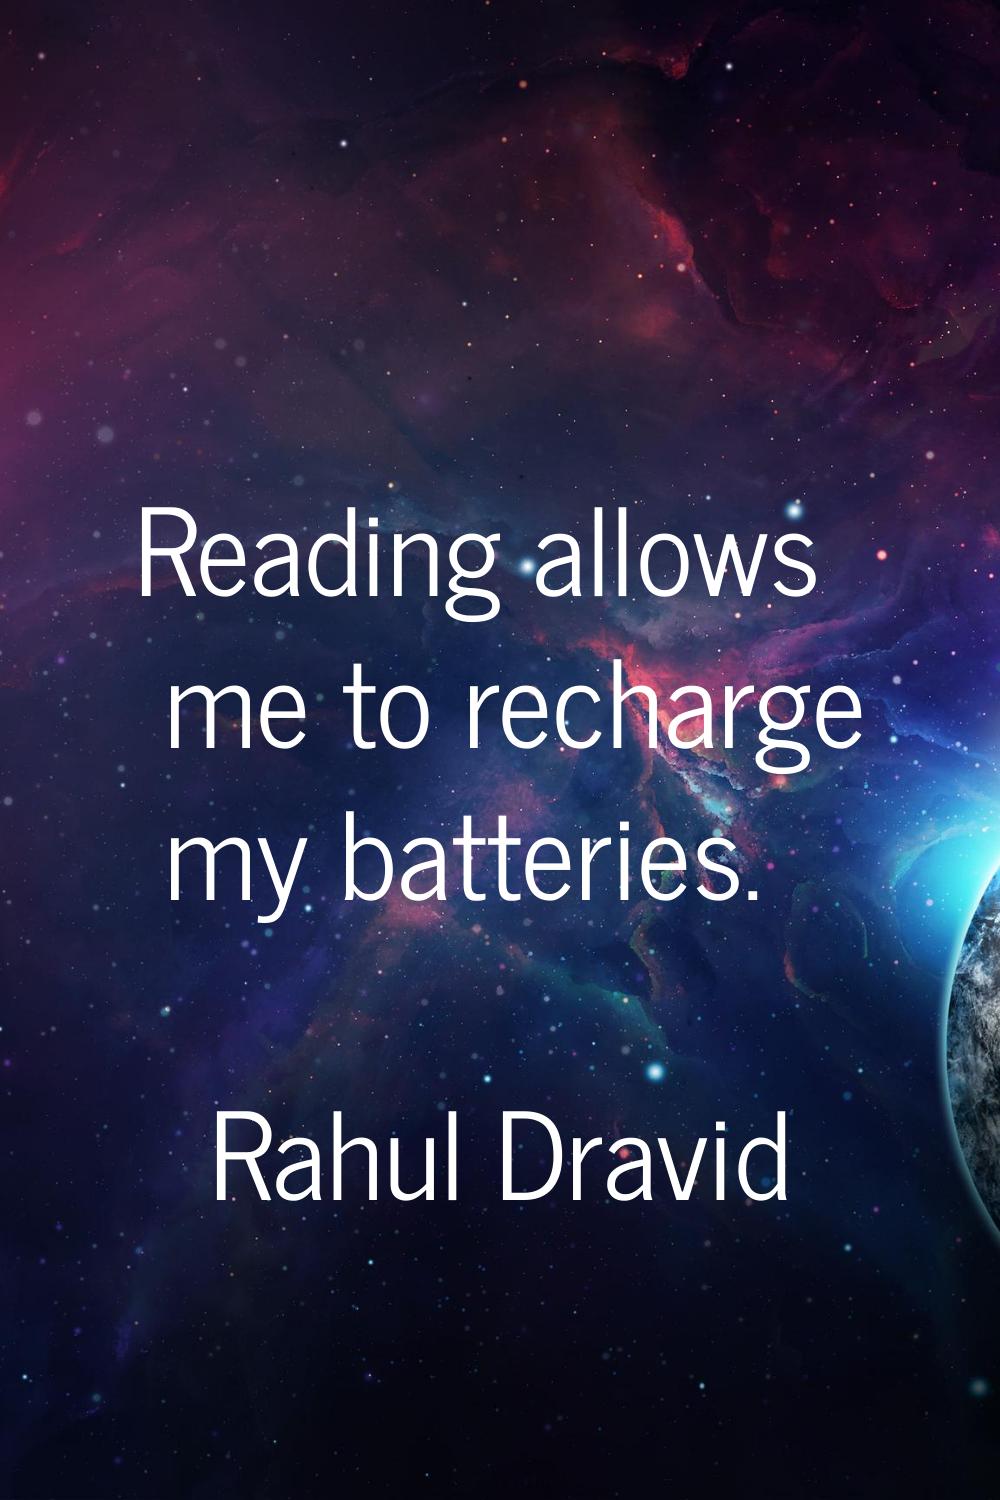 Reading allows me to recharge my batteries.